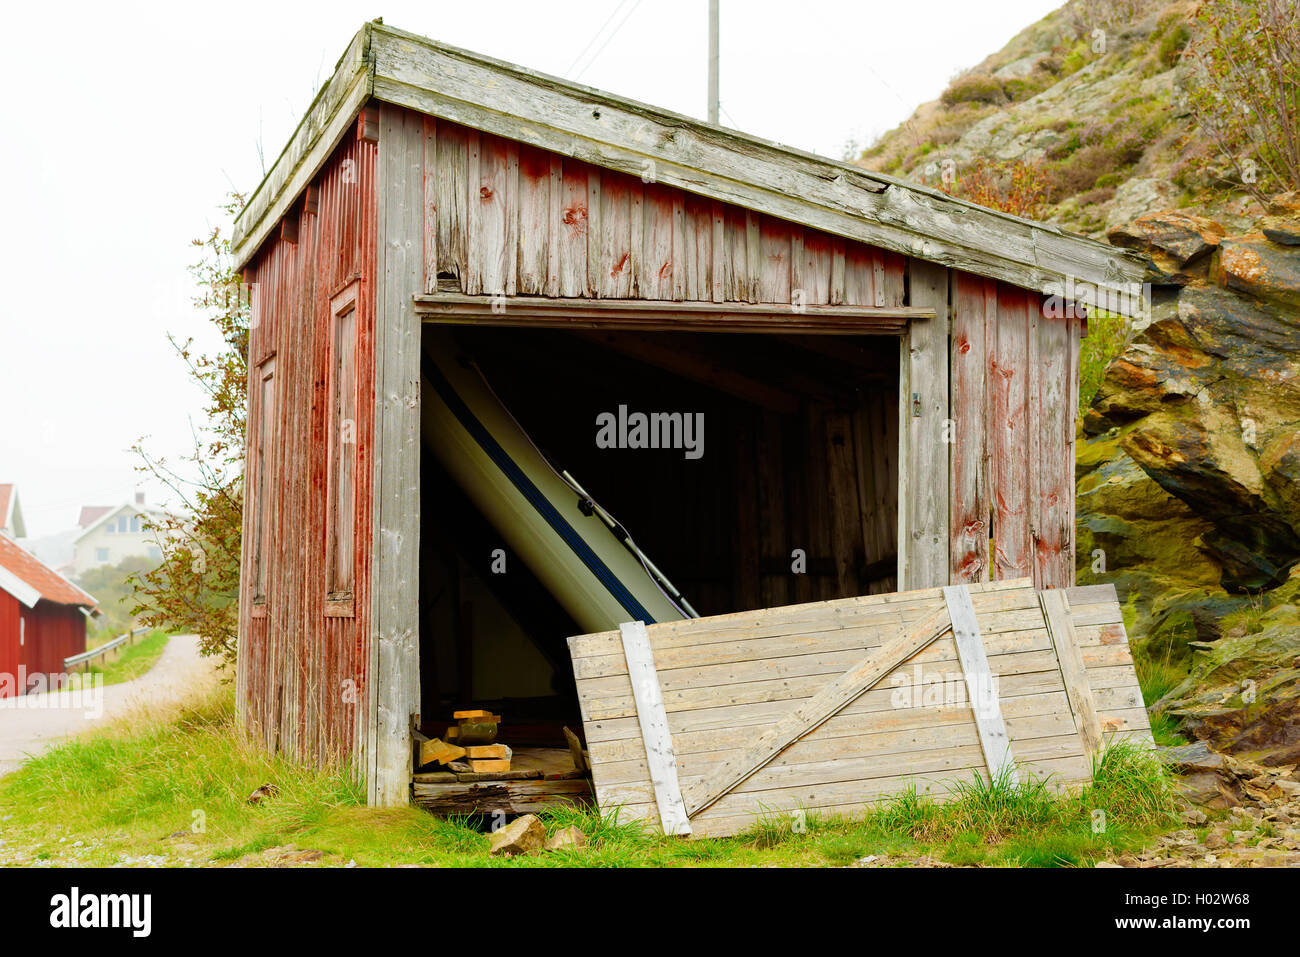 Tjorn, Sweden - September 9, 2016: Environmental documentary of coastal shed with removed side door revealing an inflatable boat Stock Photo